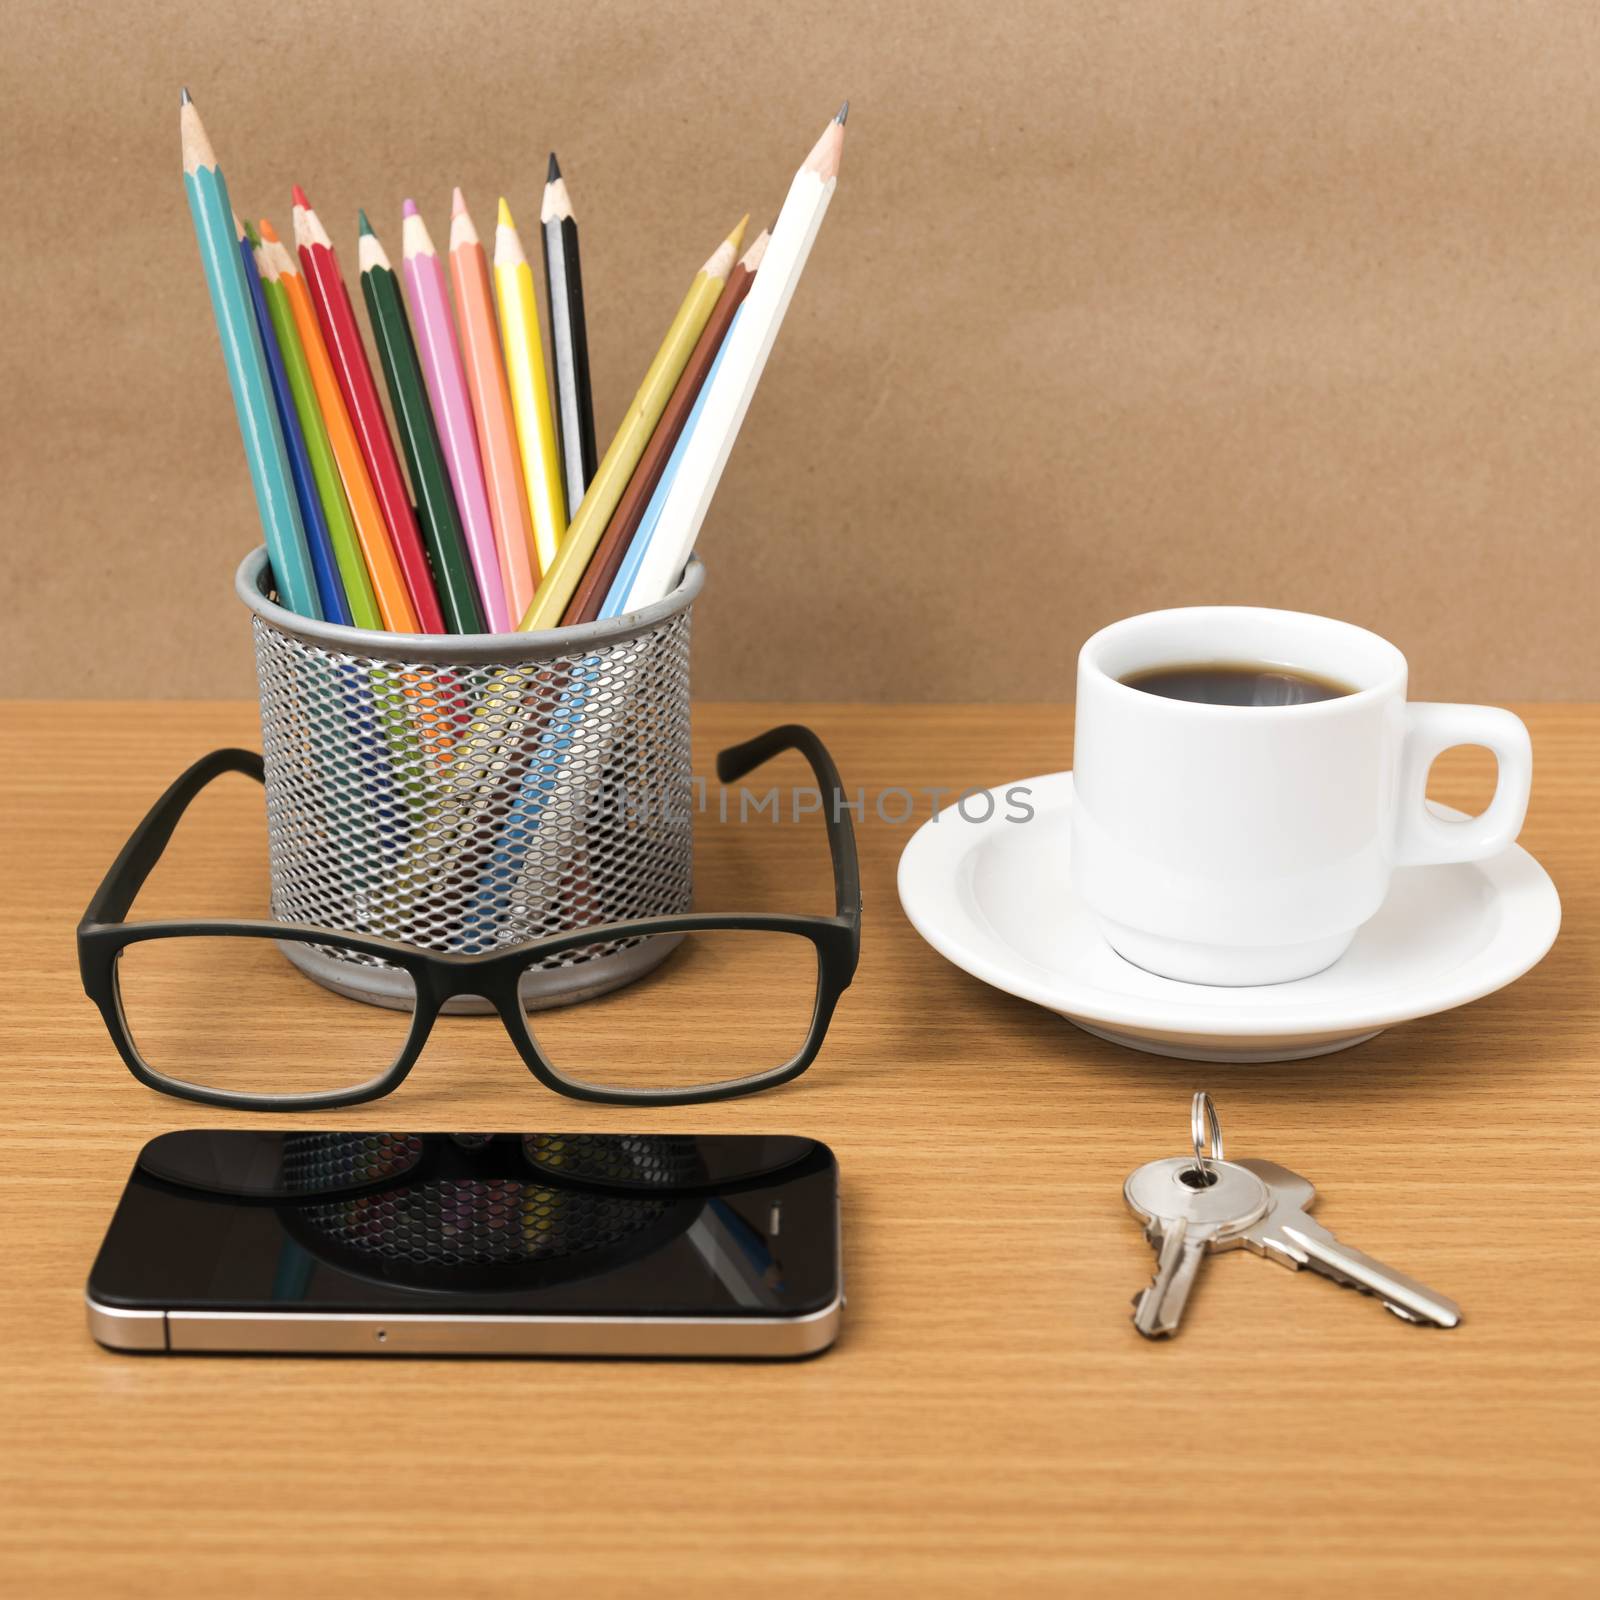 coffee,phone,eyeglasses,color pencil and key on wood table background